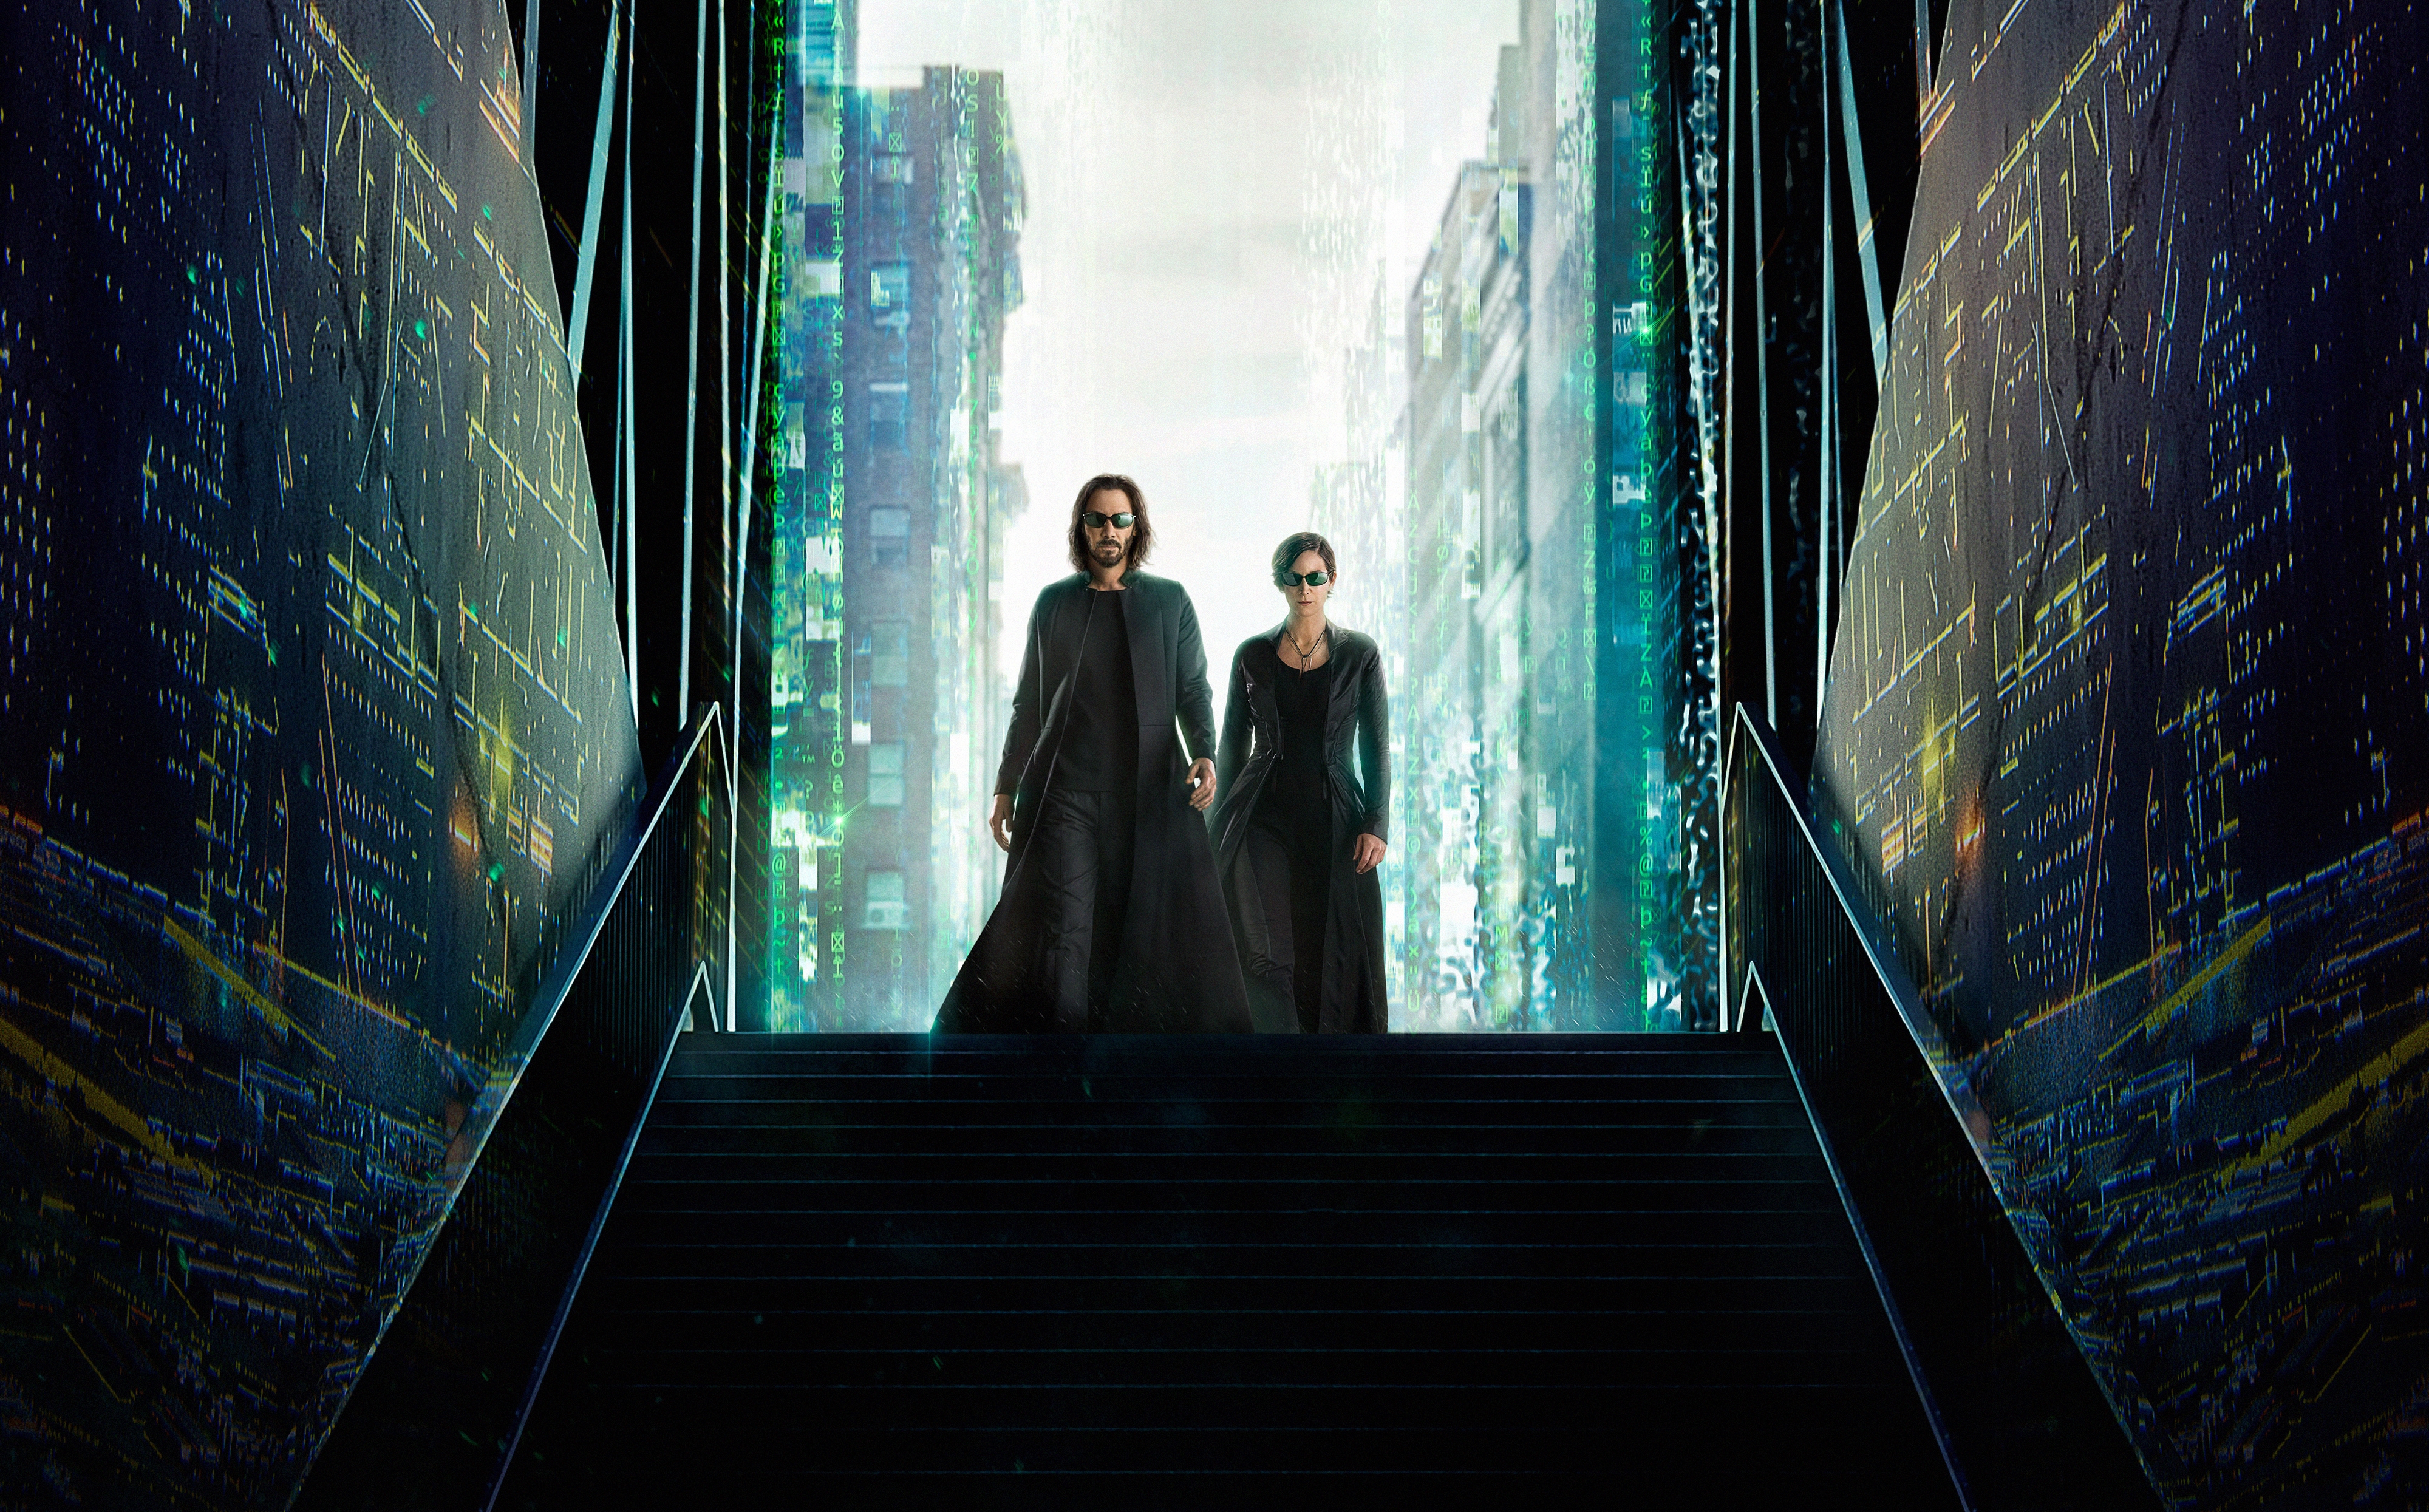 HD wallpaper, Neo, Trinity, Carrie Anne Moss, The Matrix Resurrections, 2021 Movies, Keanu Reeves